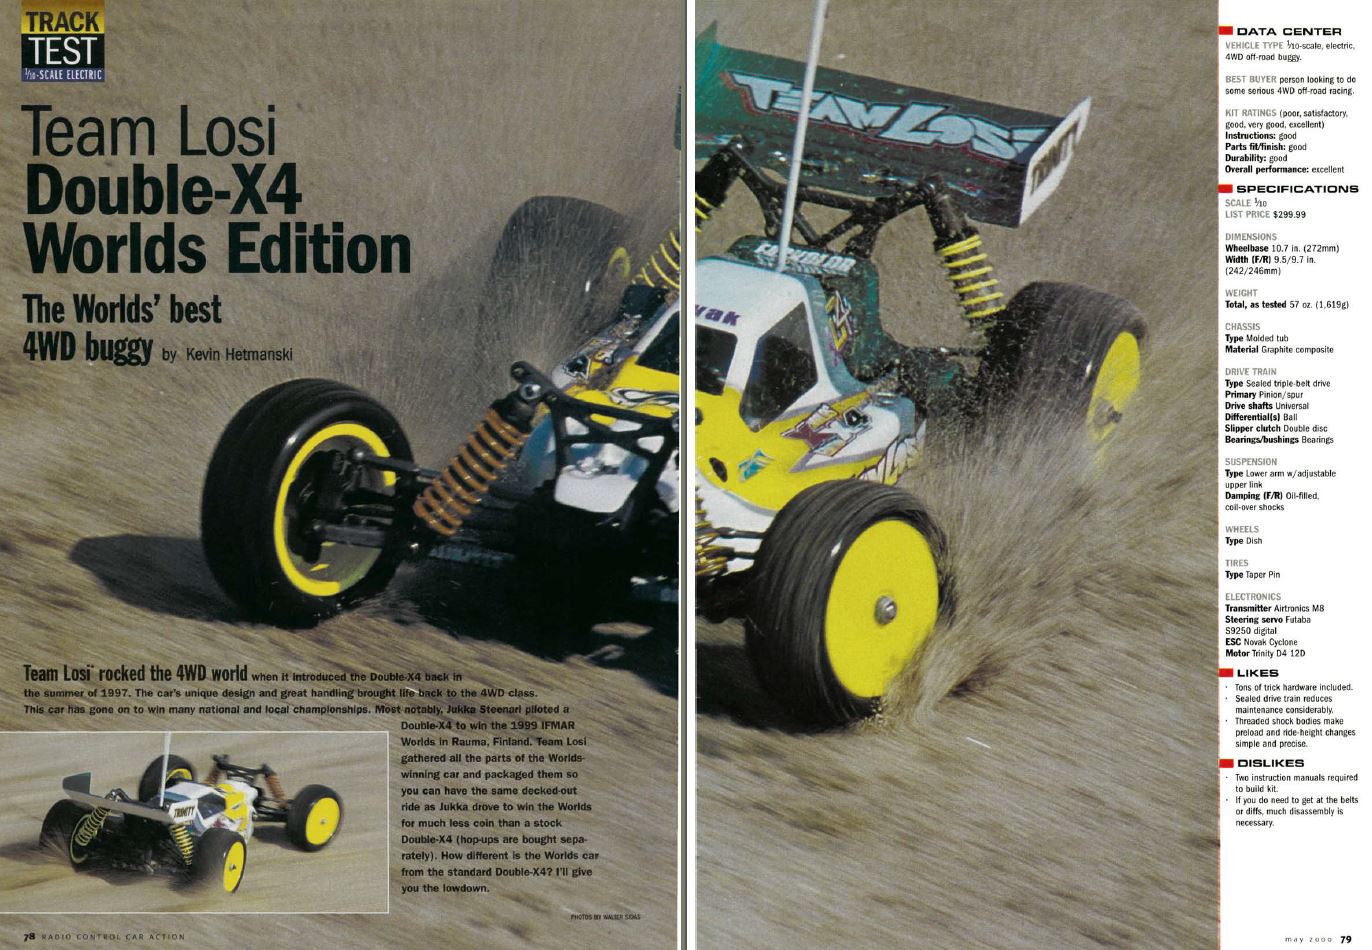 #TBT Losi XX-4 Worlds car Covered in May 2000 Issue